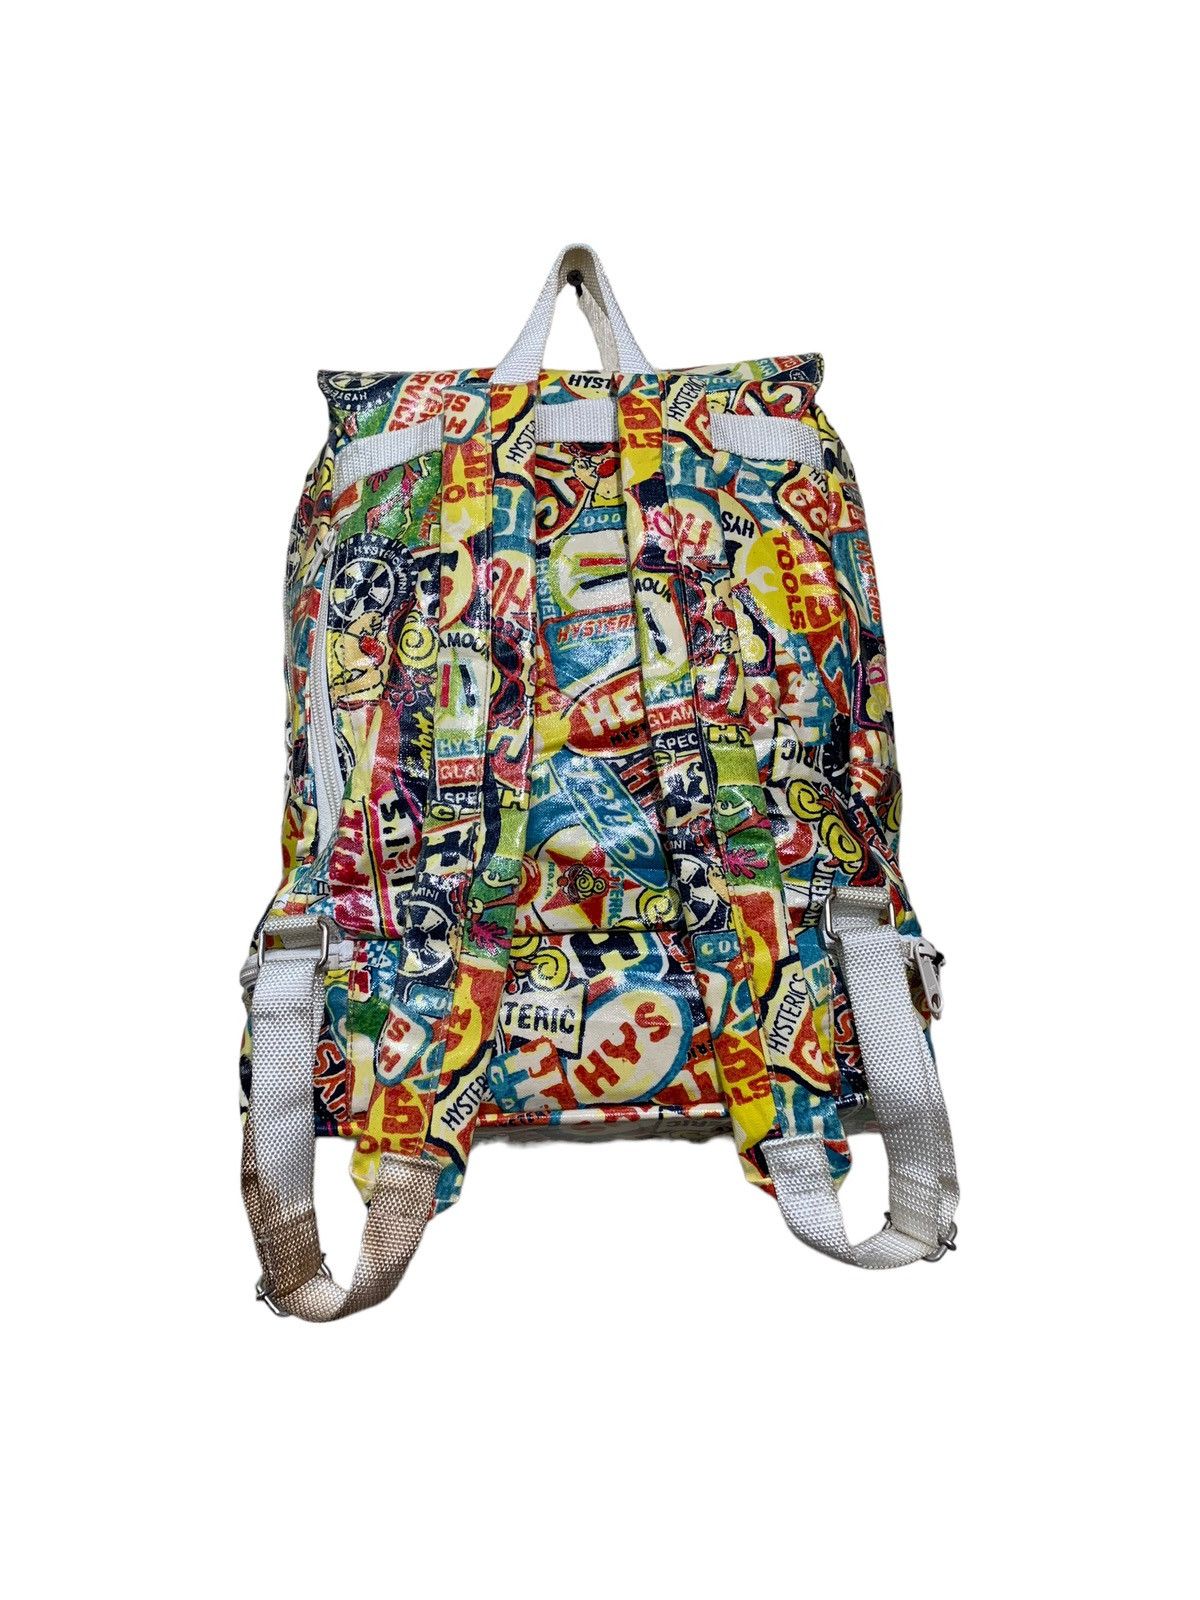 🔥SPECIAL HYSTERIC GLAMOUR BAGPACKS - 7